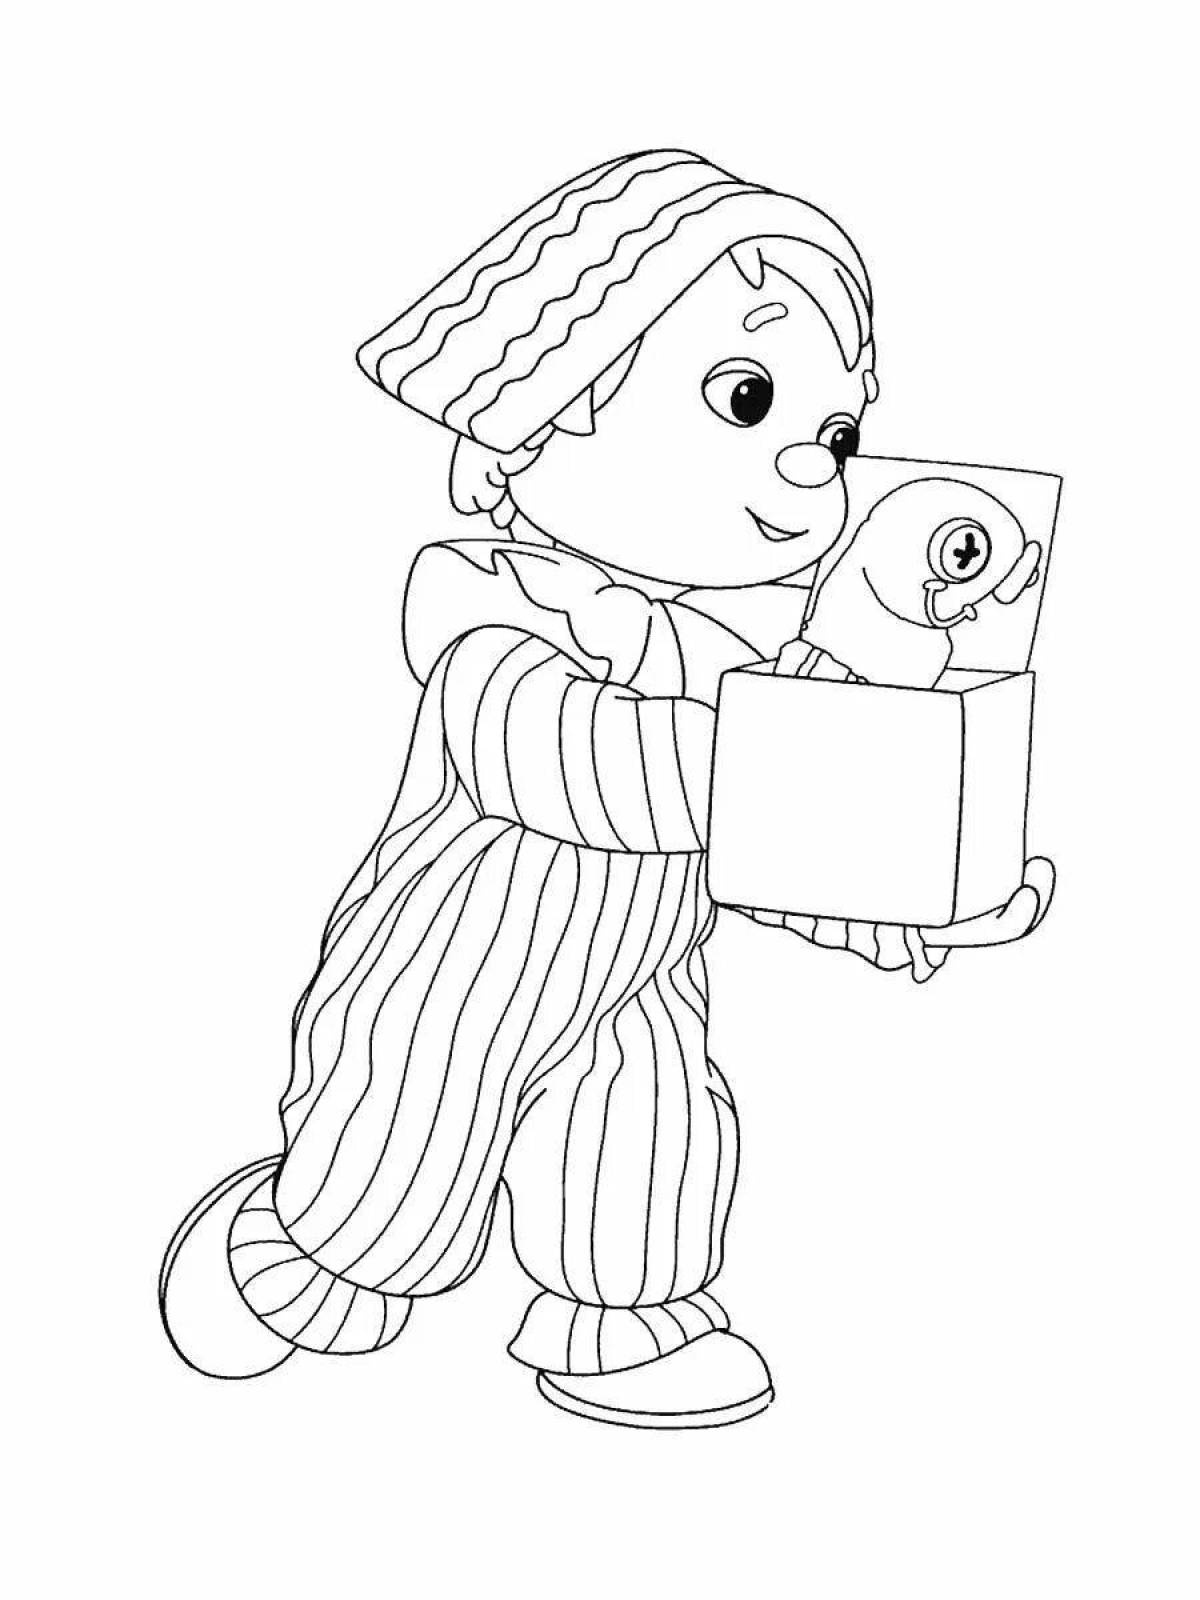 Color-frenzy andy coloring page